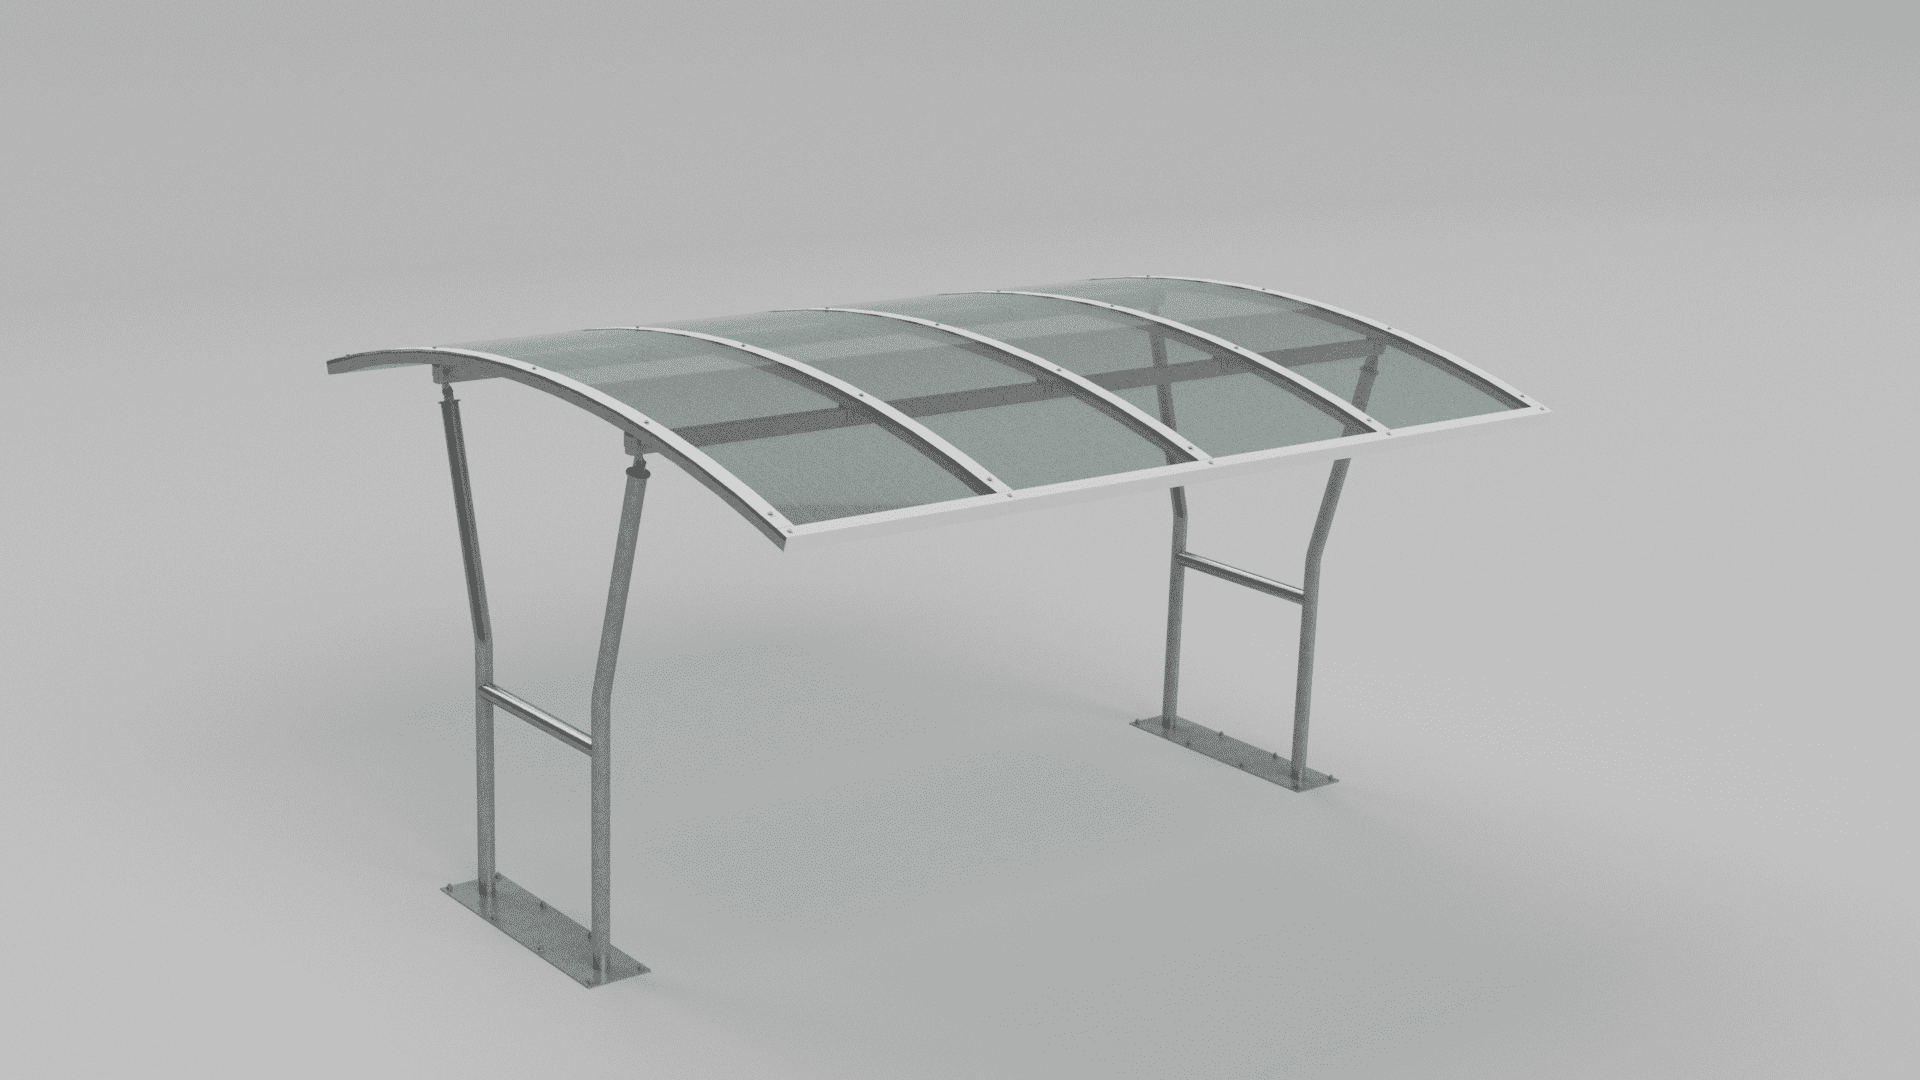 Malford Cycle Shelter MCS204